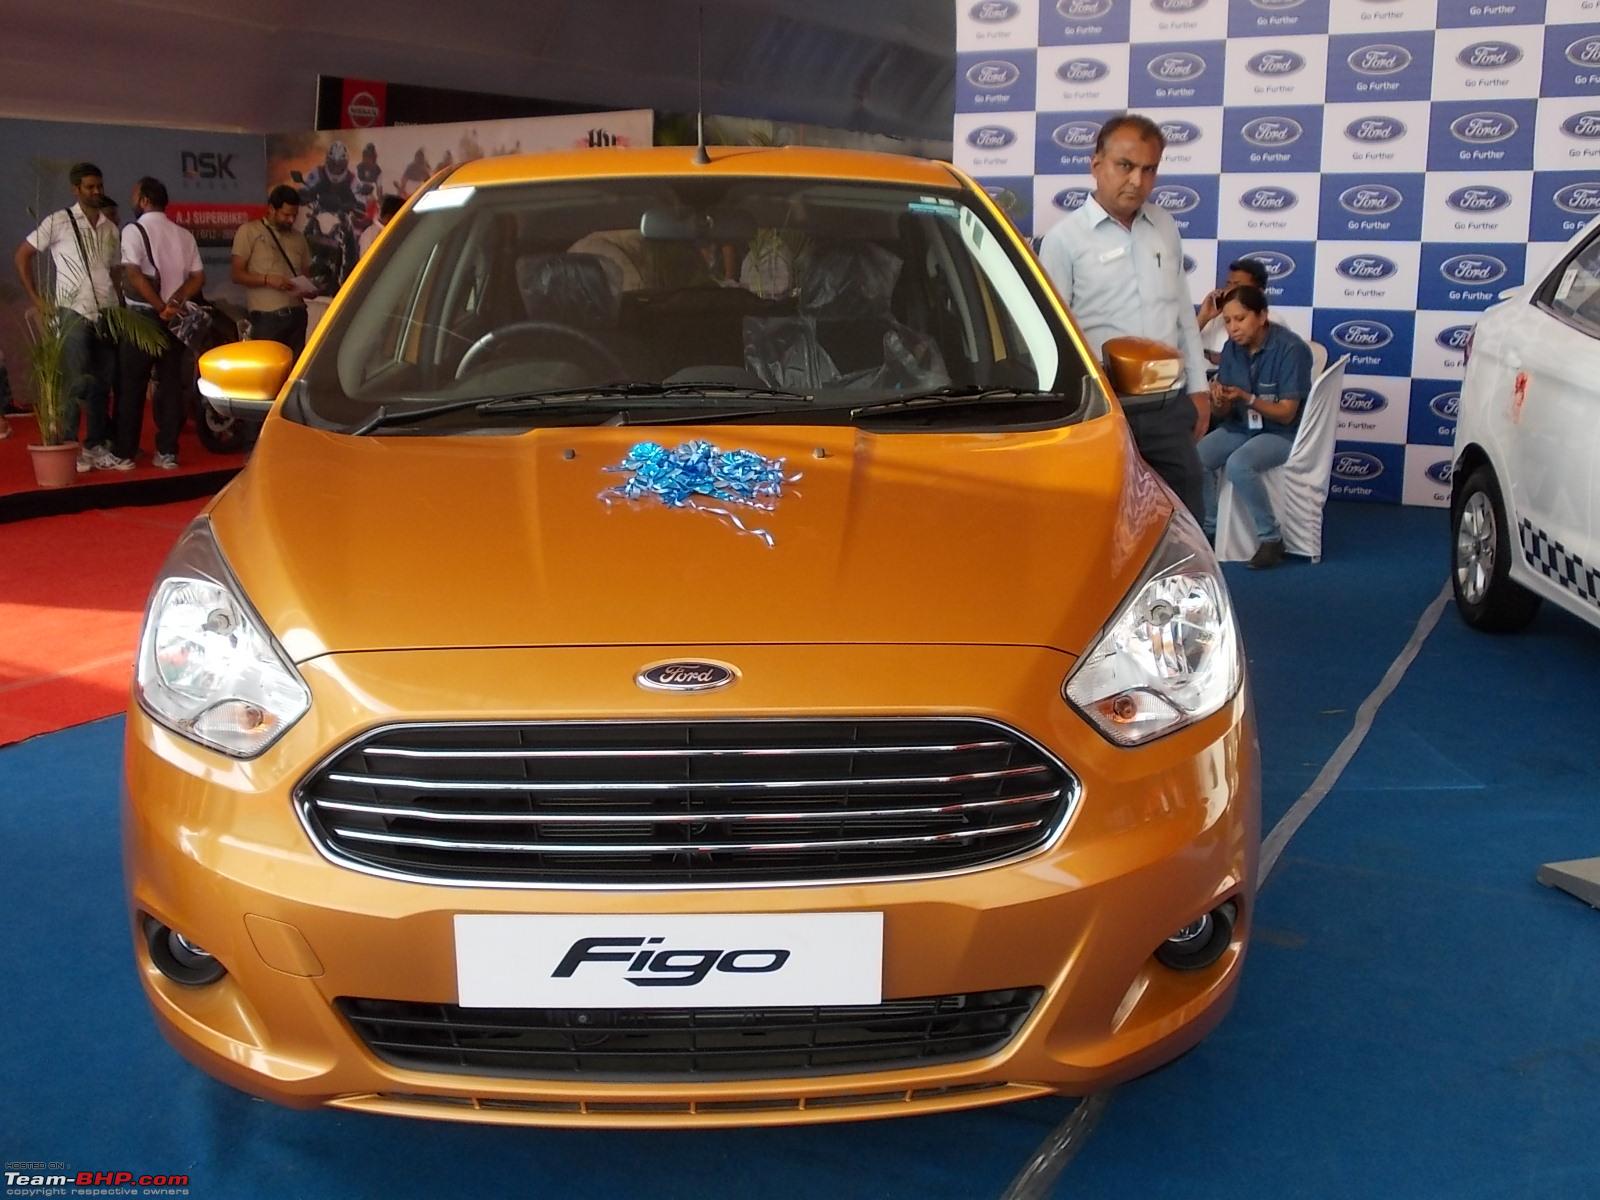 Ford India cuts Aspire, Figo prices by up to INR 91,000 - Page 3 - Team-BHP